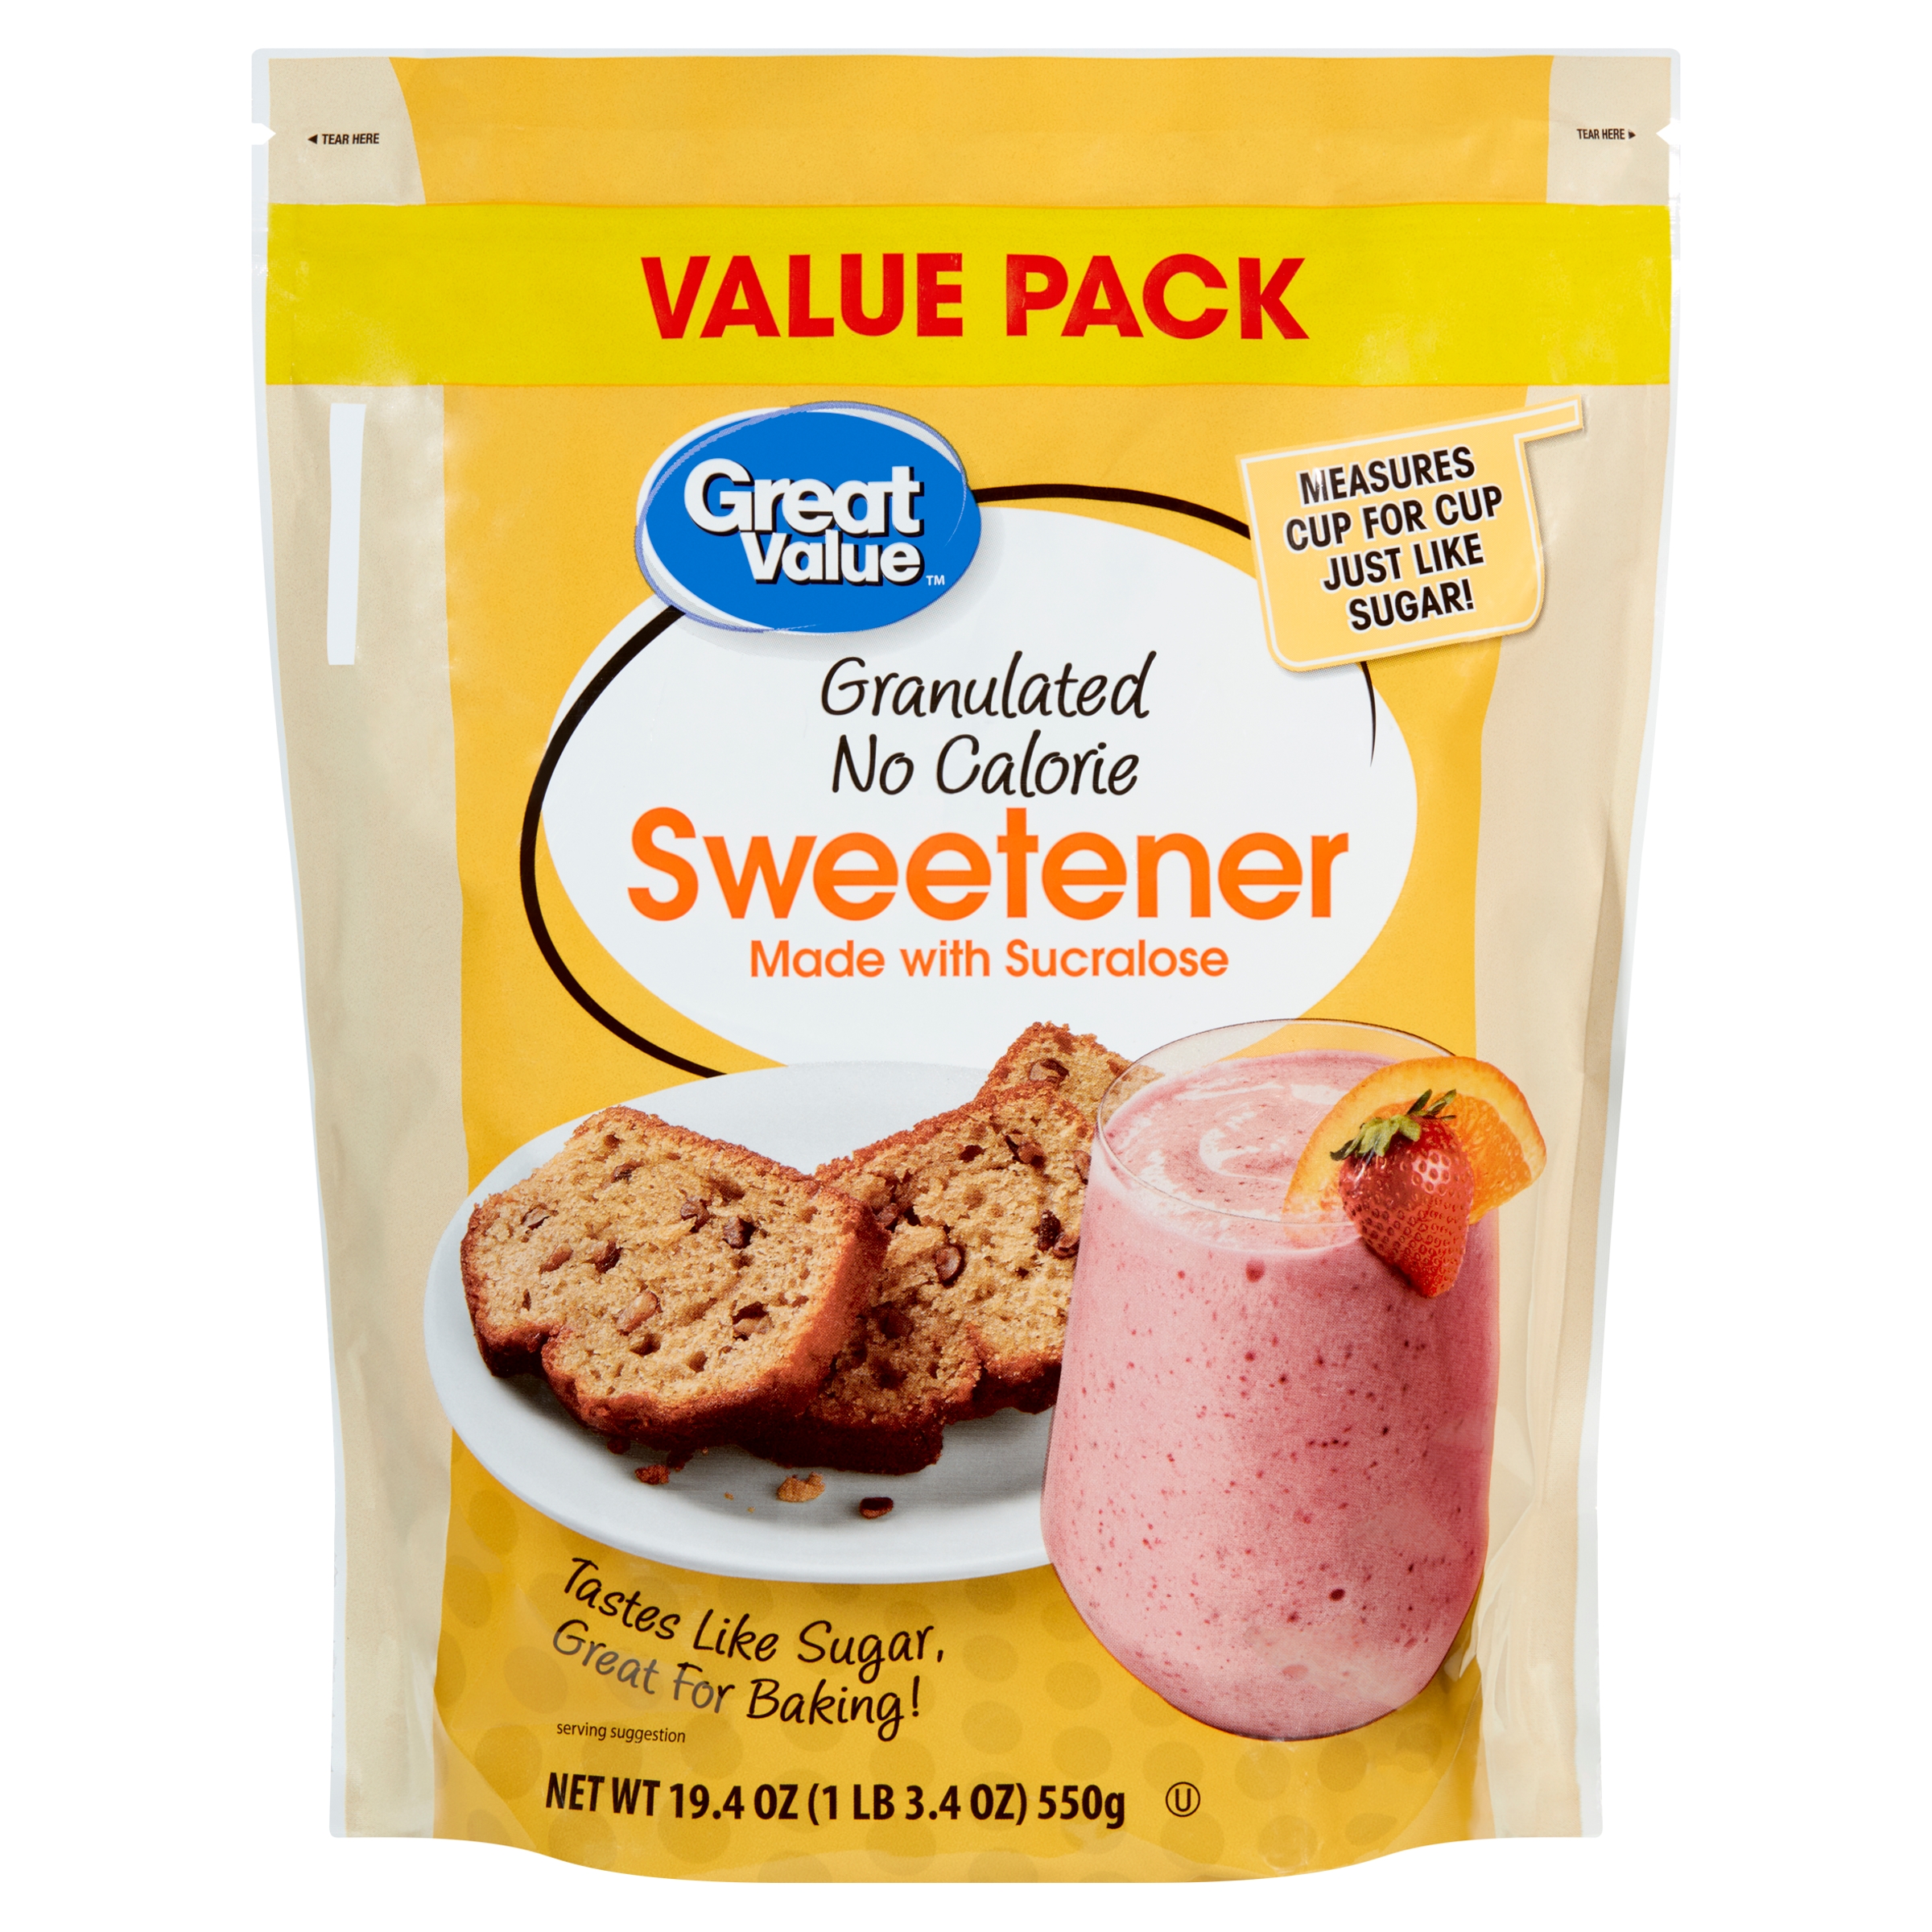 Great Value Granulated No Calorie Sweetener Value Pack, 19.4 oz - image 1 of 8